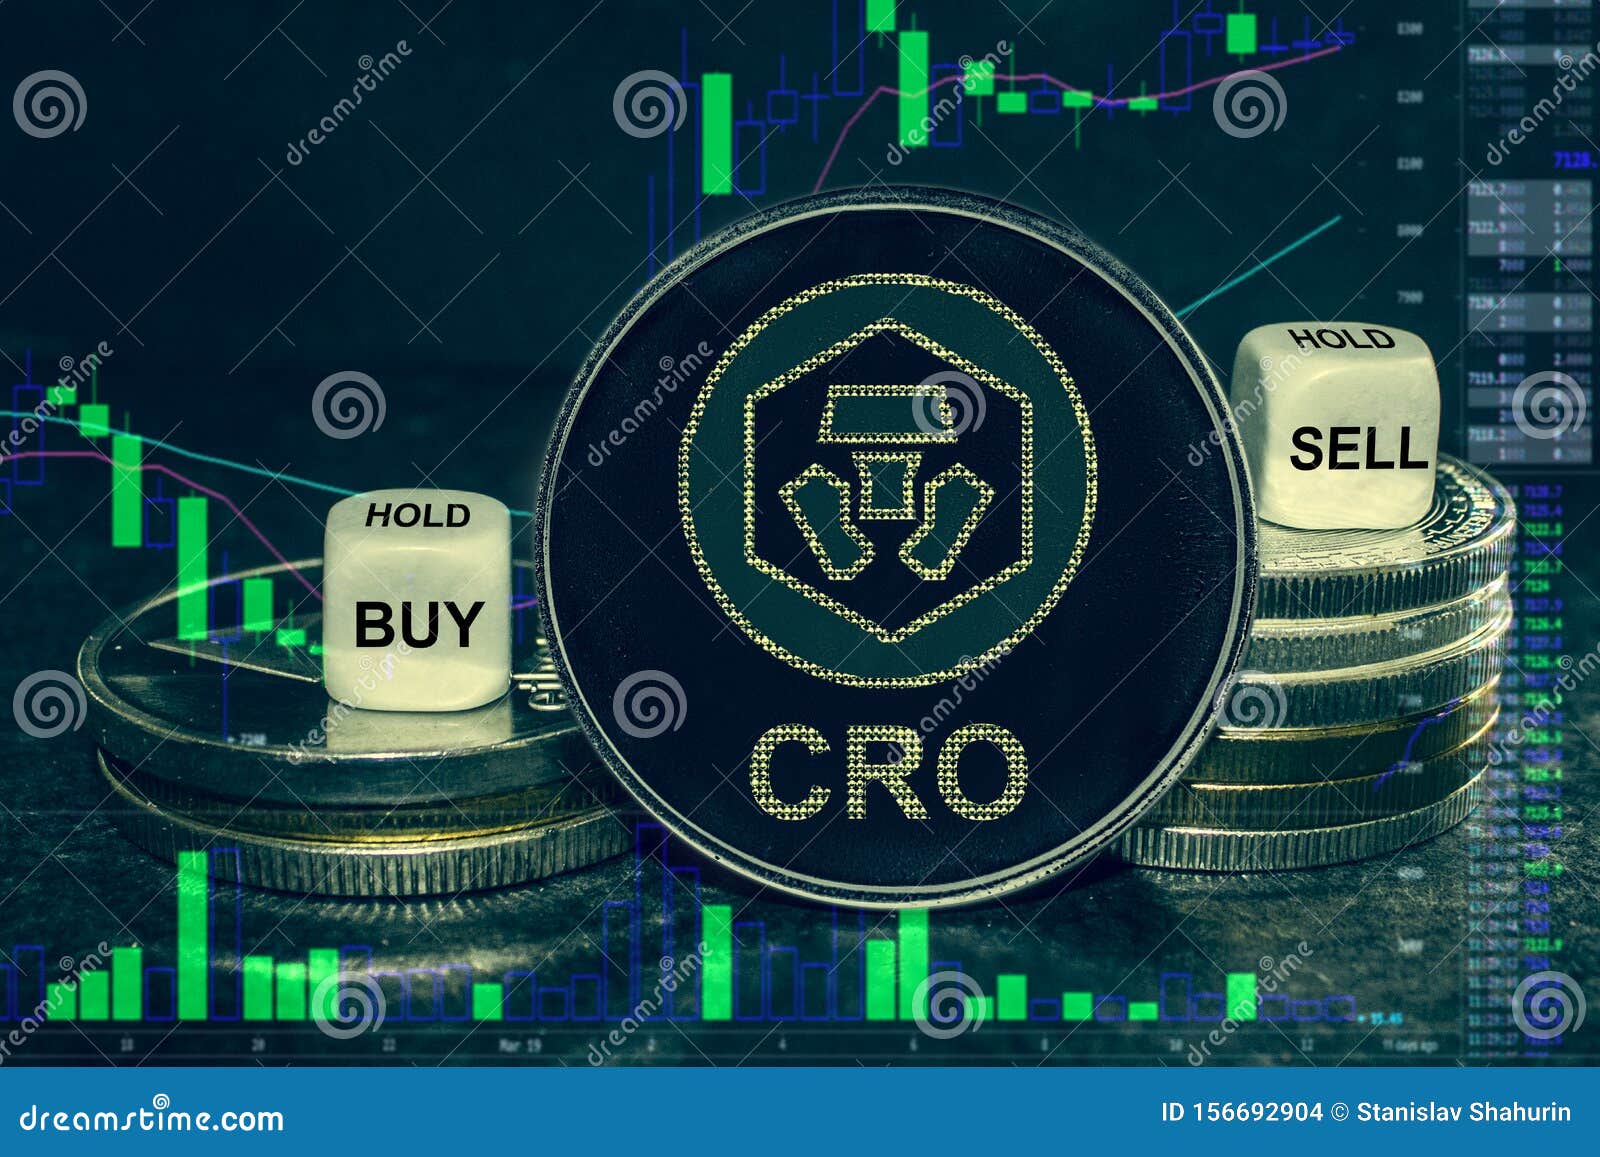 buy sell or hold crypto